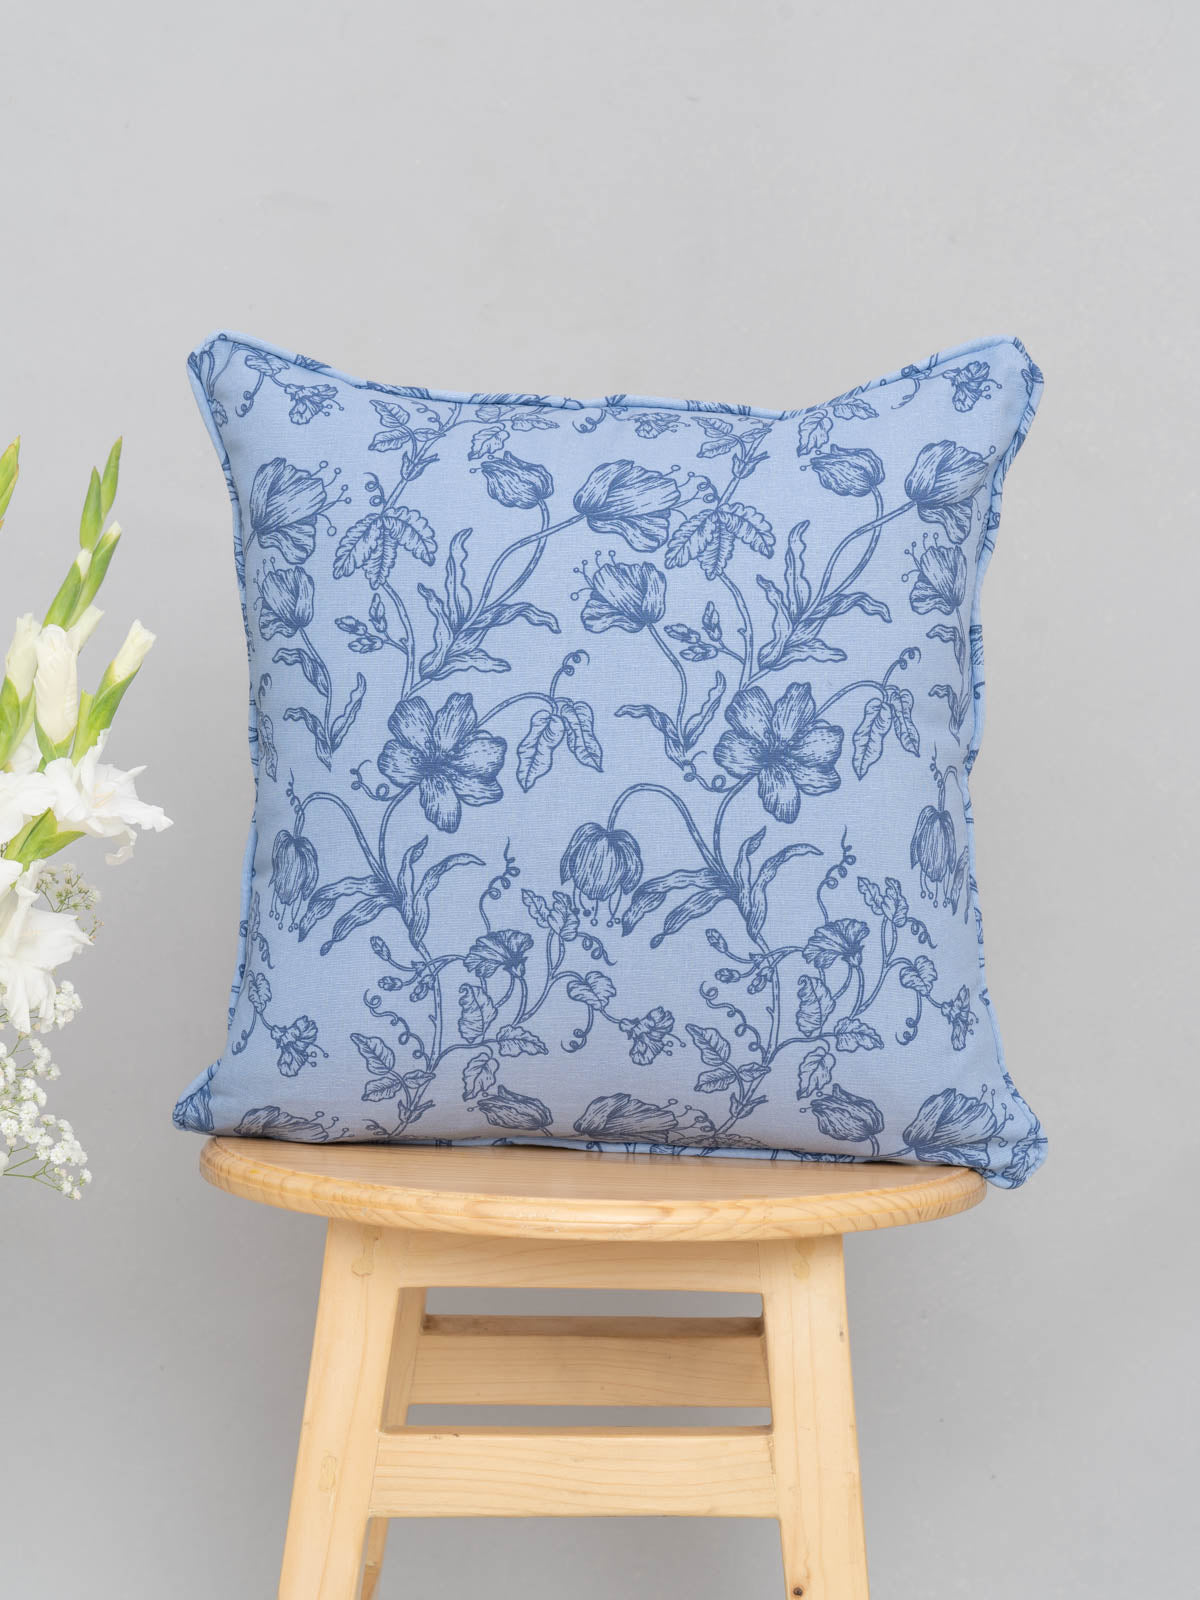 Humming Birds, French Farmhouse, Powder Blue Linen , Pampas Grass Set Of 4 Combo Cotton Cushion Cover - Blue